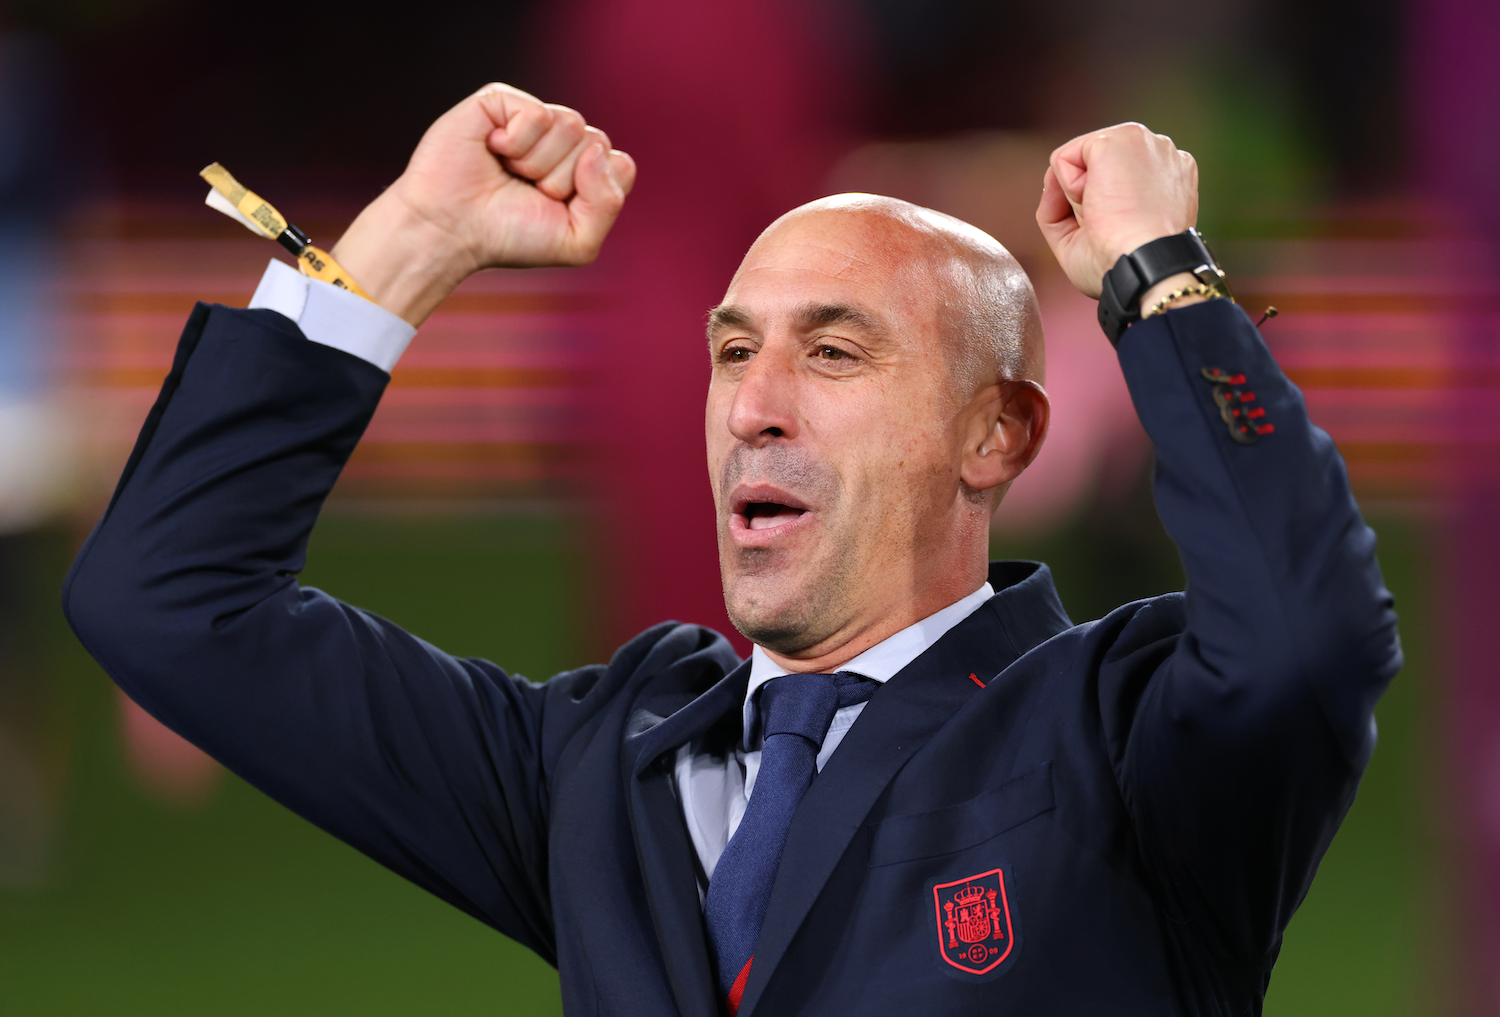 RFEF president Luis Rubiales pumps his fists in celebration during the 2023 Women's World Cup